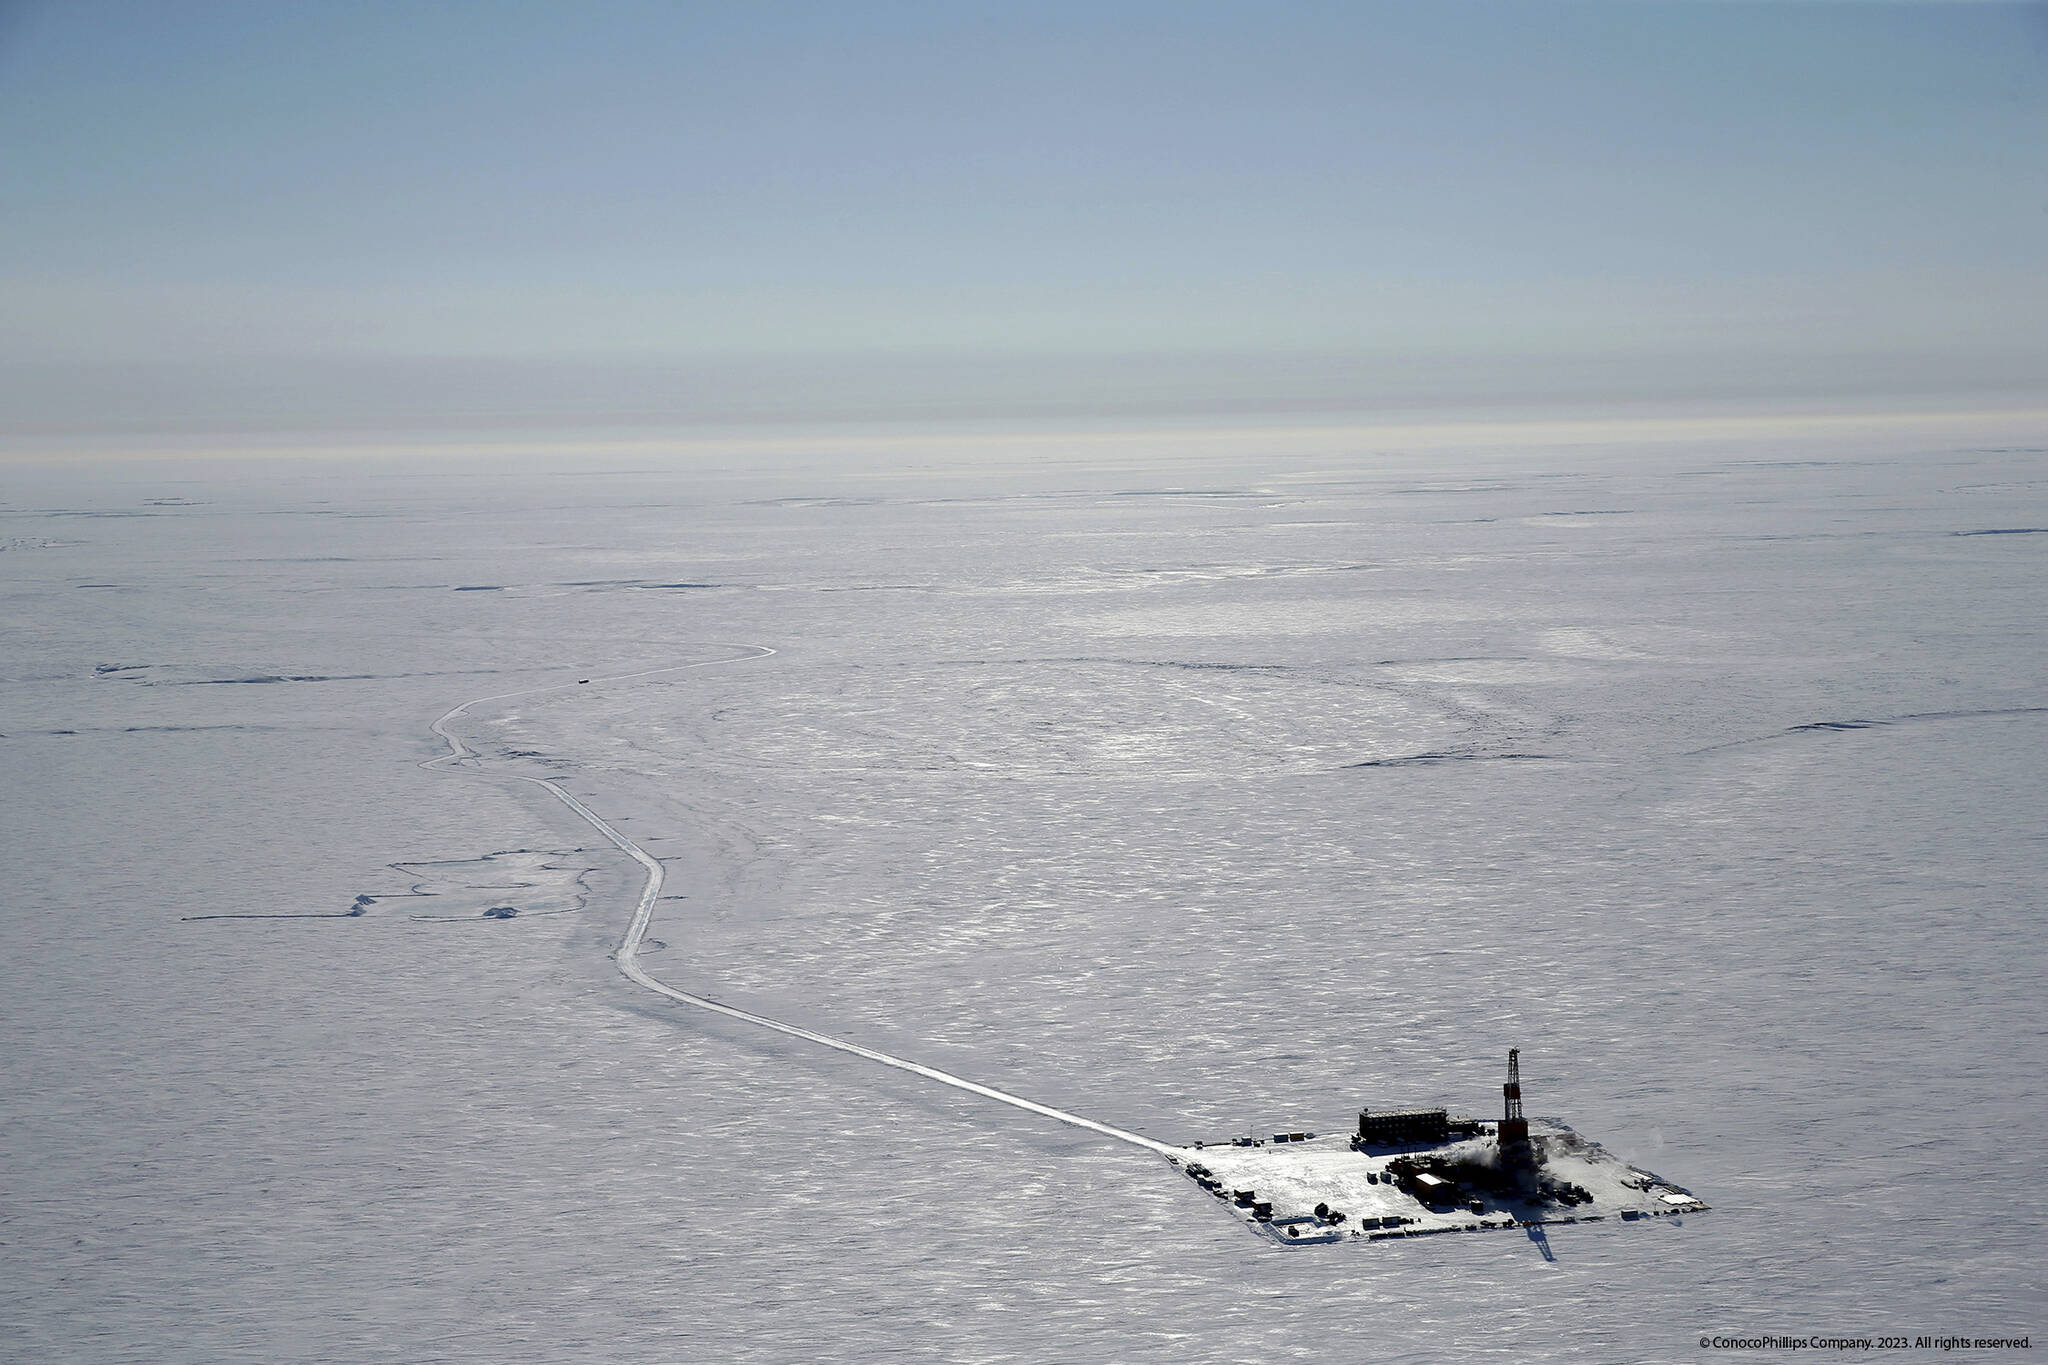 This 2019 aerial photo provided by ConocoPhillips shows an exploratory drilling camp at the proposed site of the Willow oil project on Alaska’s North Slope. The Biden administration issued a long-awaited study on Wednesday, Feb. 1, 2023, that recommends allowing three oil drilling sites in the region of far northern Alaska. The move, while not final, has angered environmentalists who see it as a betrayal of President Joe Biden’s pledges to reduce carbon emissions and promote green energy. (ConocoPhillips via AP)